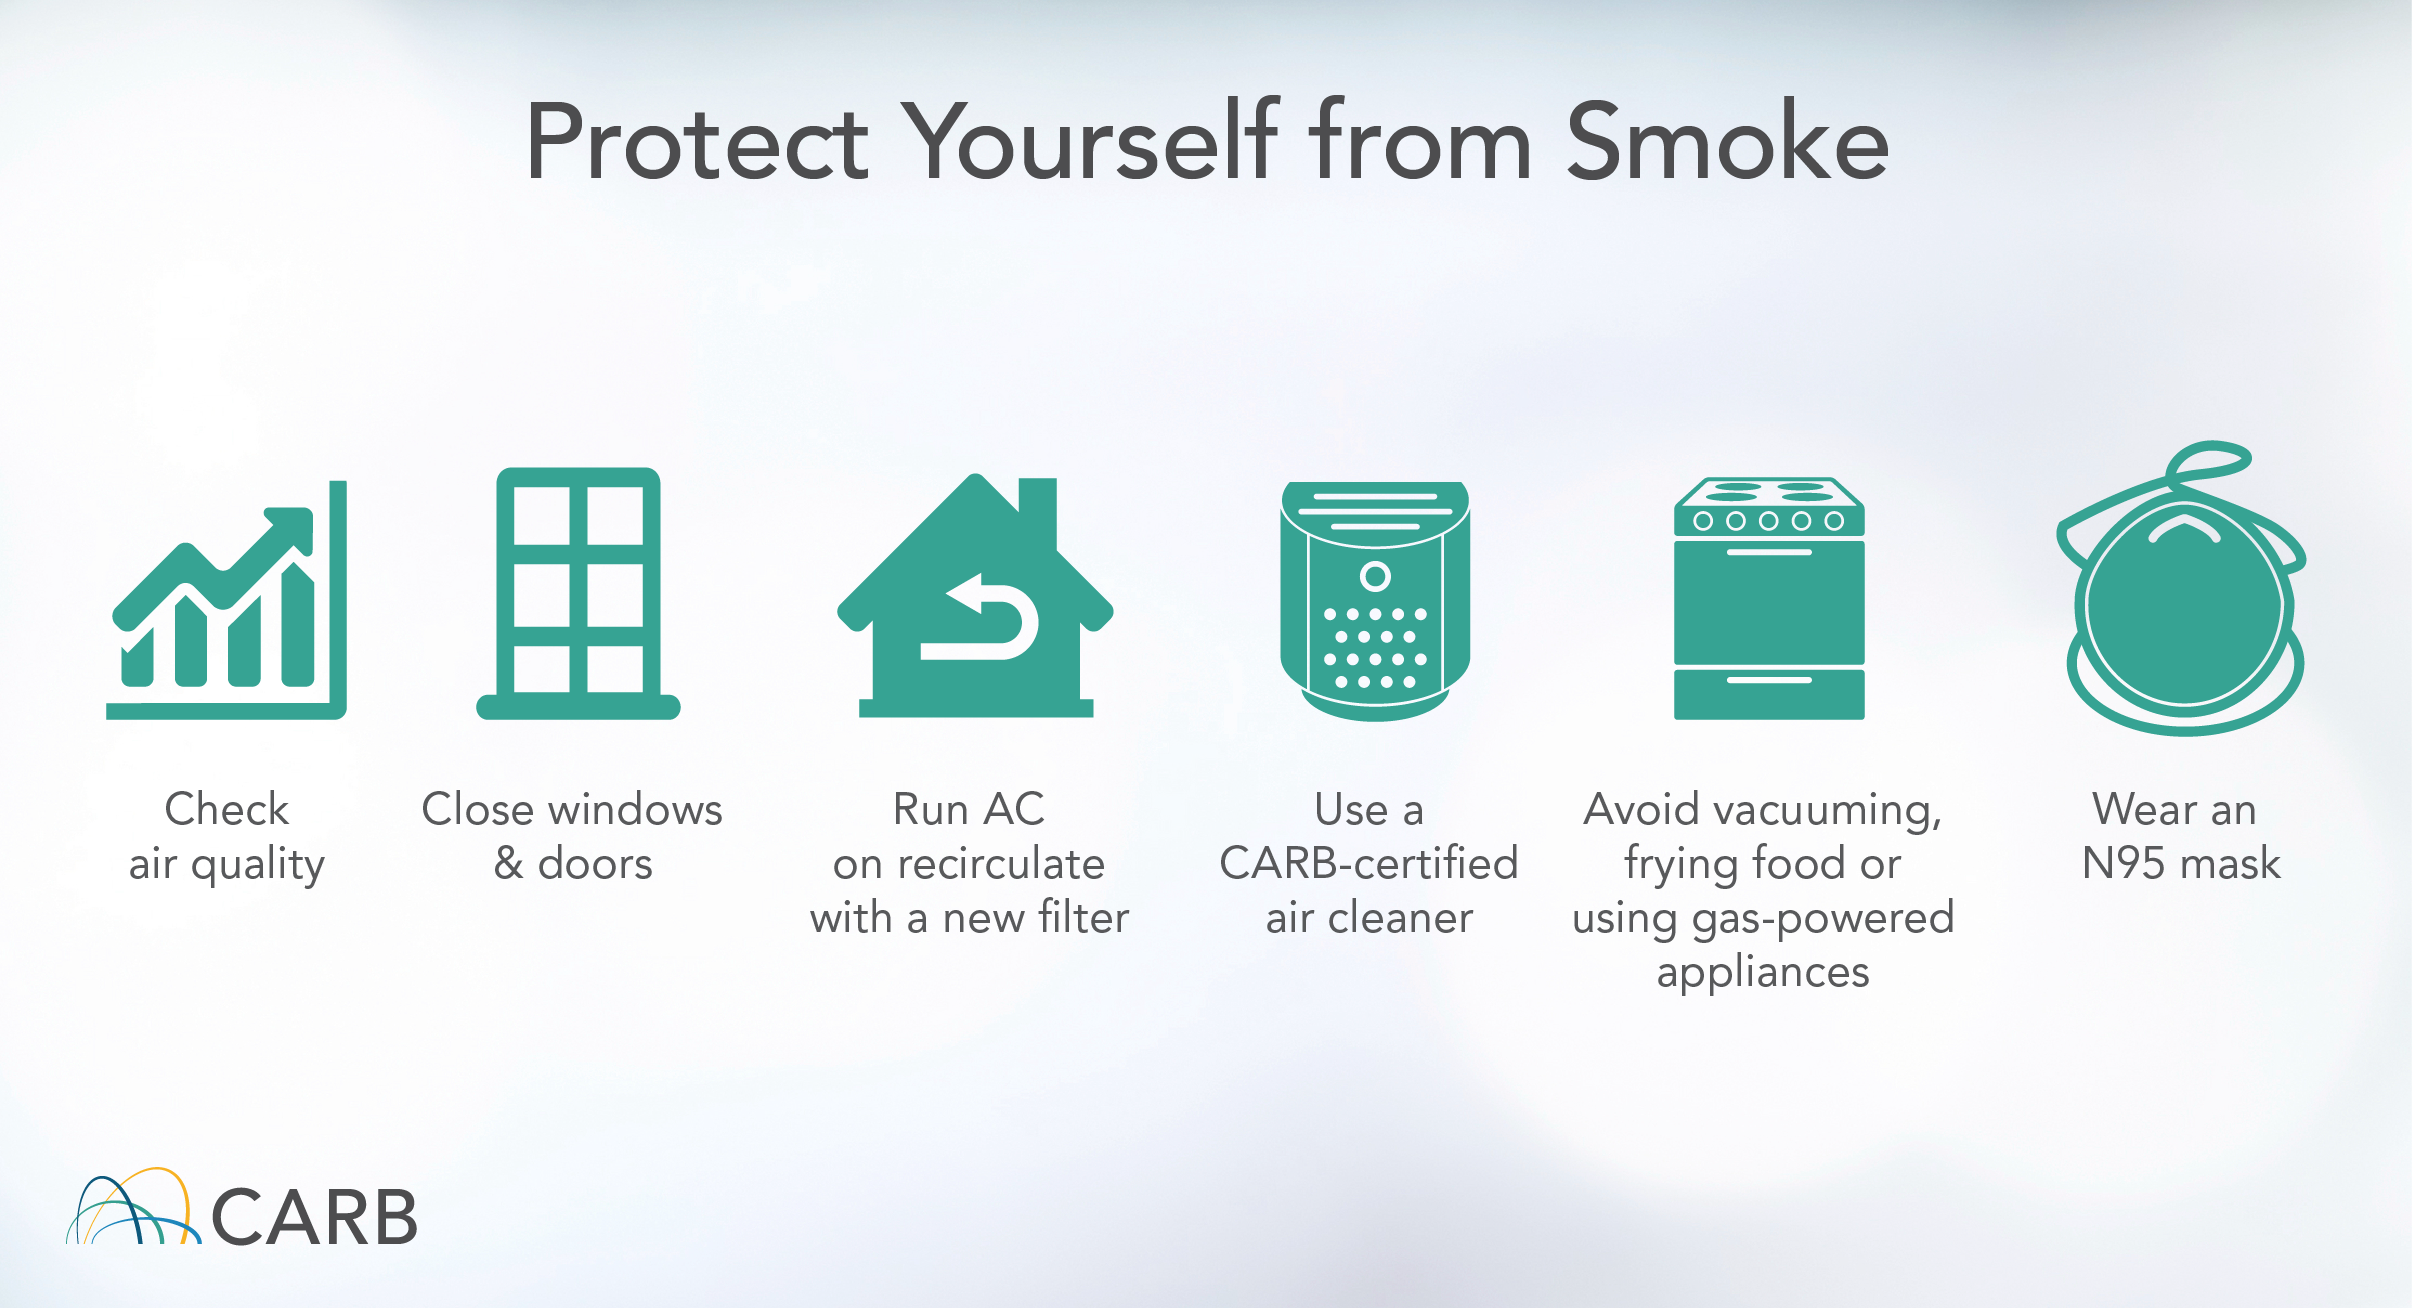 Protect Yourself from Smoke Check air quality Close windows & doors Run AC on recirculate with a new filter Use a CARB-certified air cleaner Avoid vacuuming, frying food or using gas-powered appliances Wear an N95 mask 